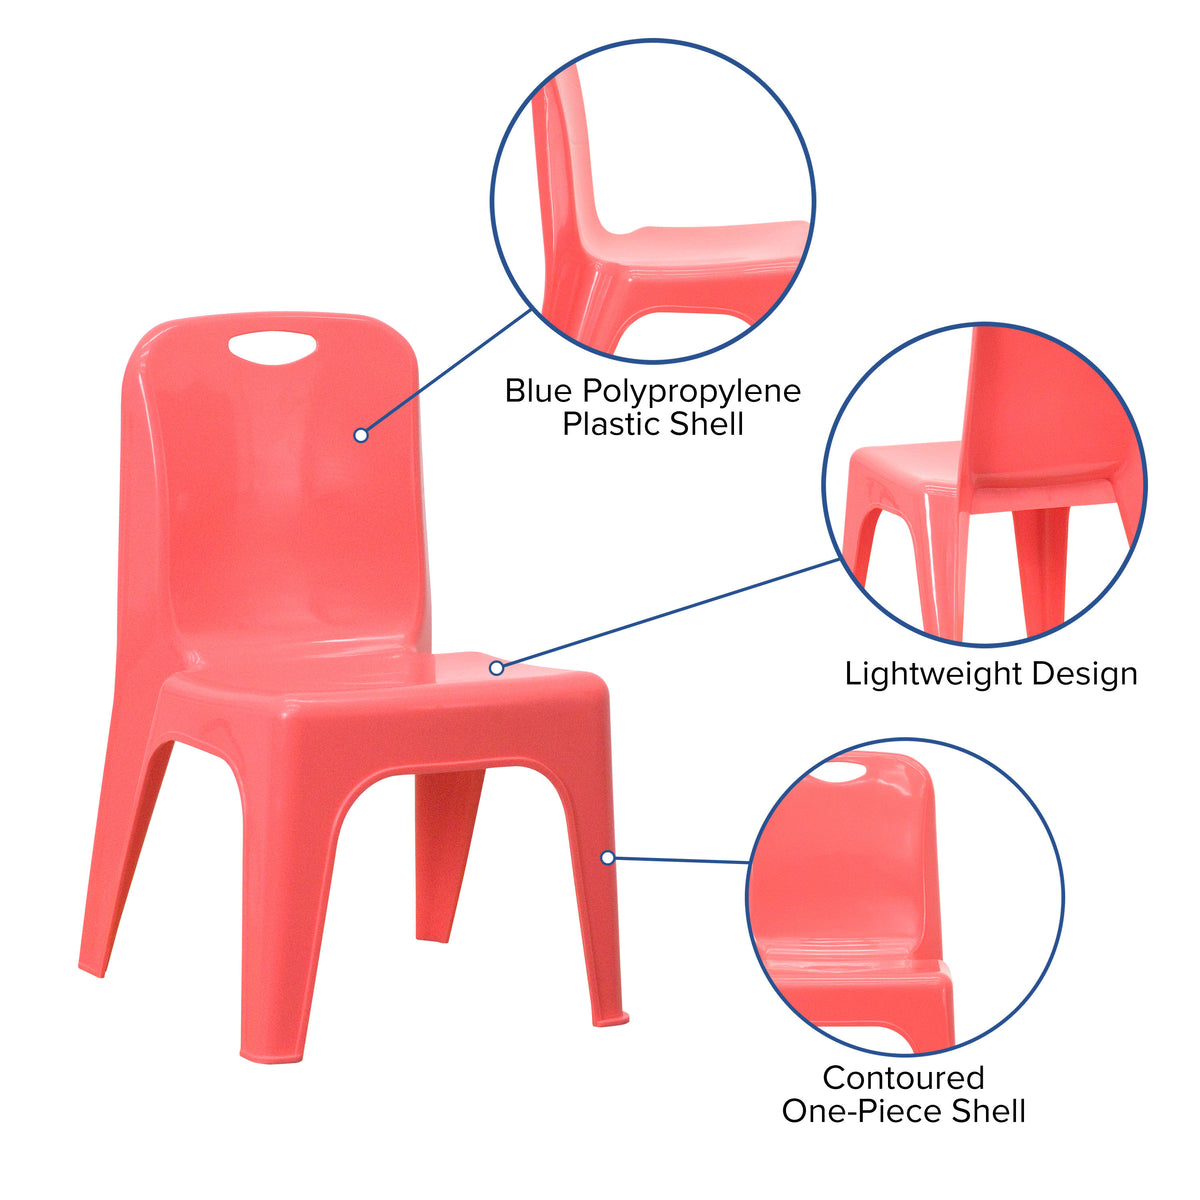 Red |#| 2 Pack Red Plastic Stackable School Chair with Carrying Handle and 11inchH Seat